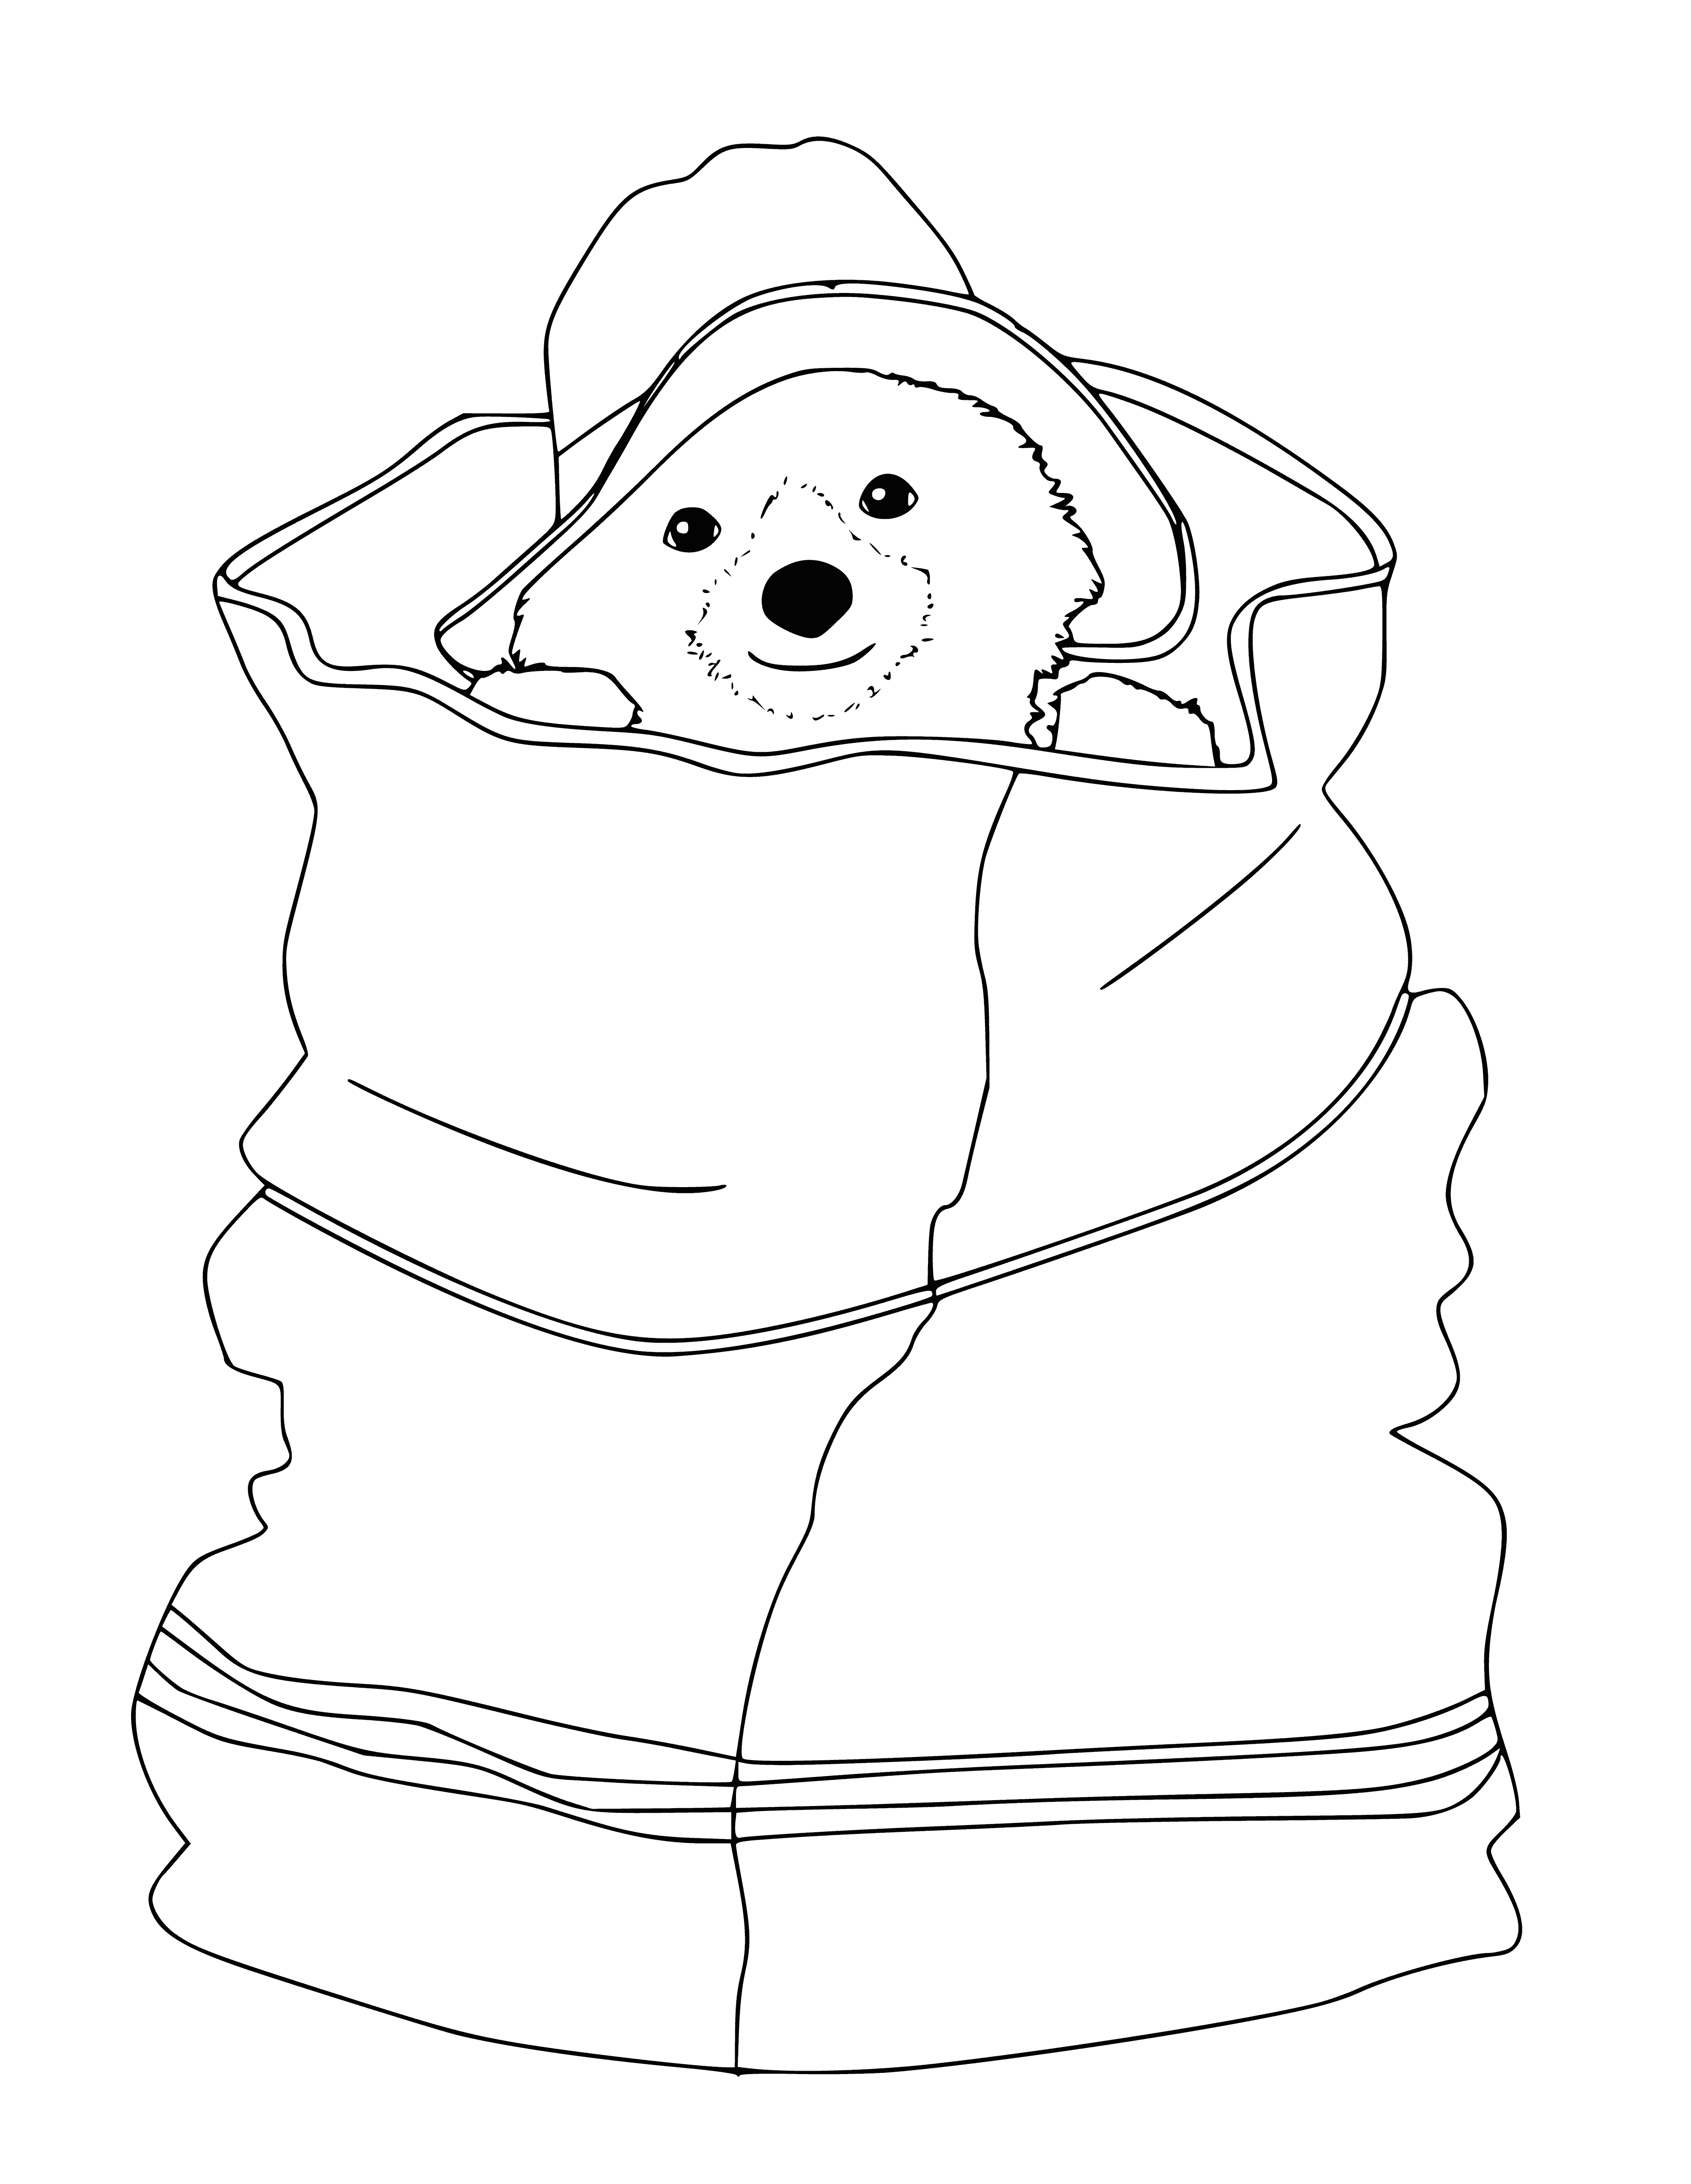 coloring page: Brown teddy bear peeking out of open, brown suitcase. #TeddyBearLove